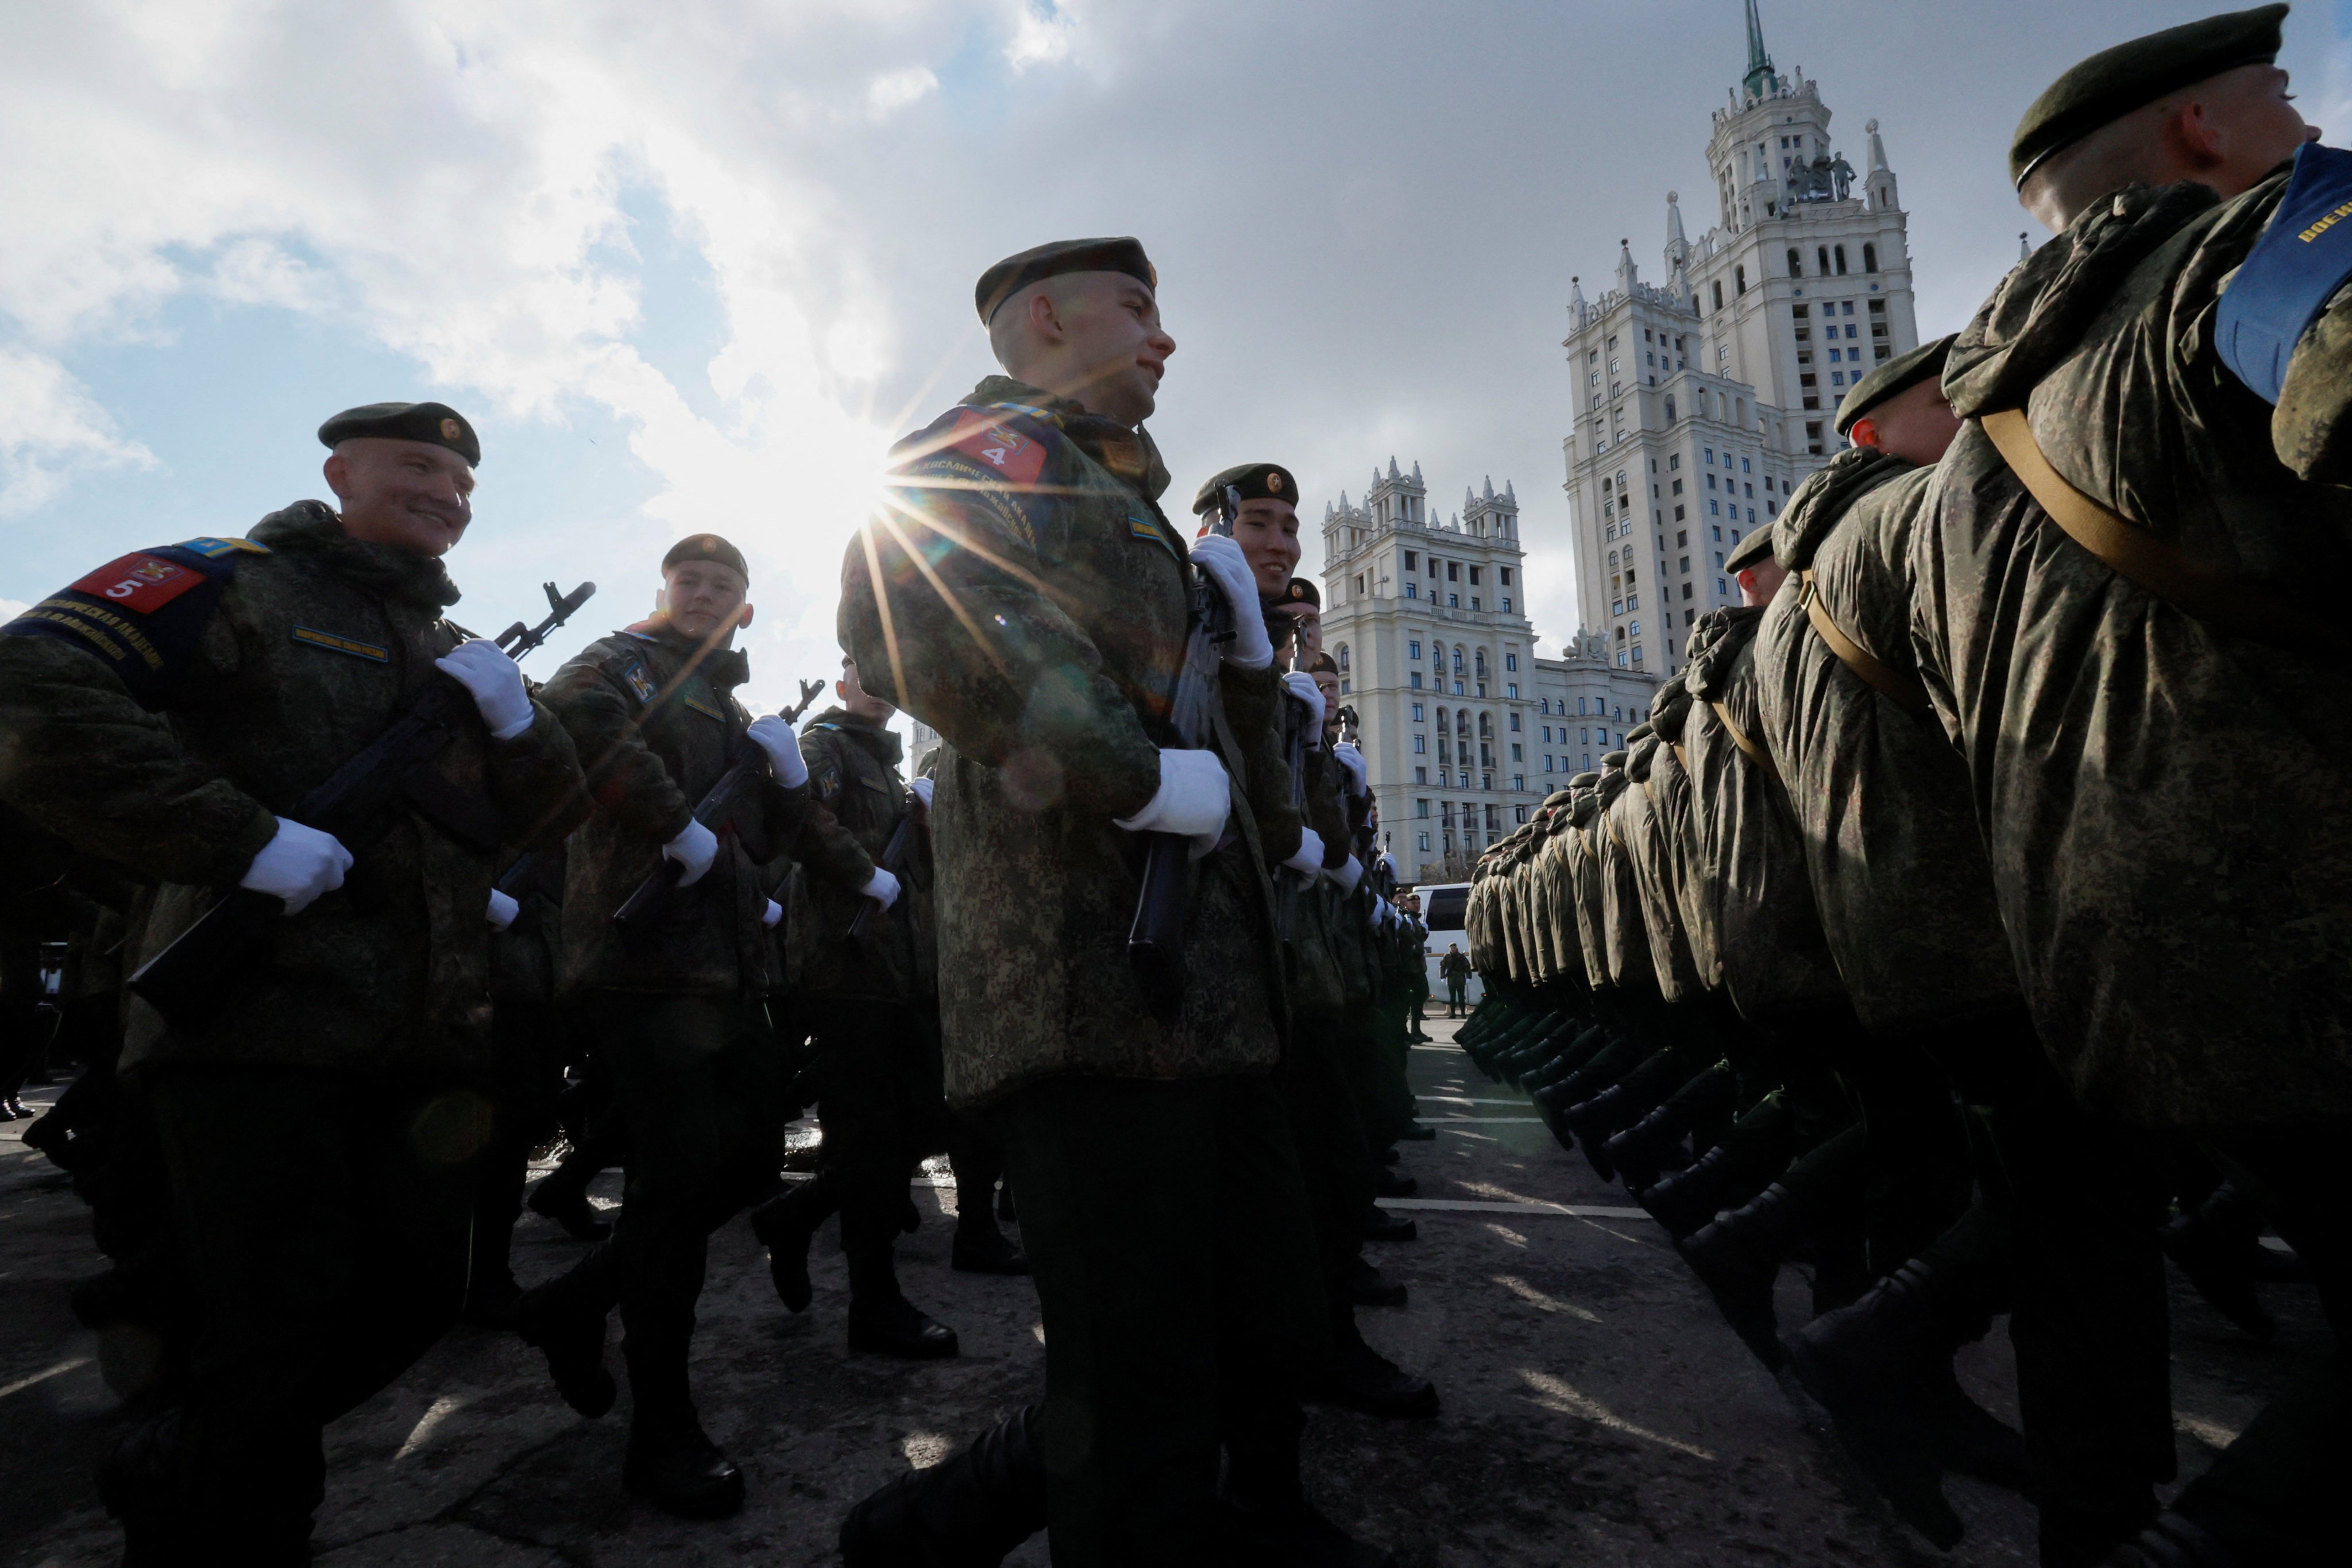 Russian service members march before the military parade in Moscow, Russia. Photo: Reuters